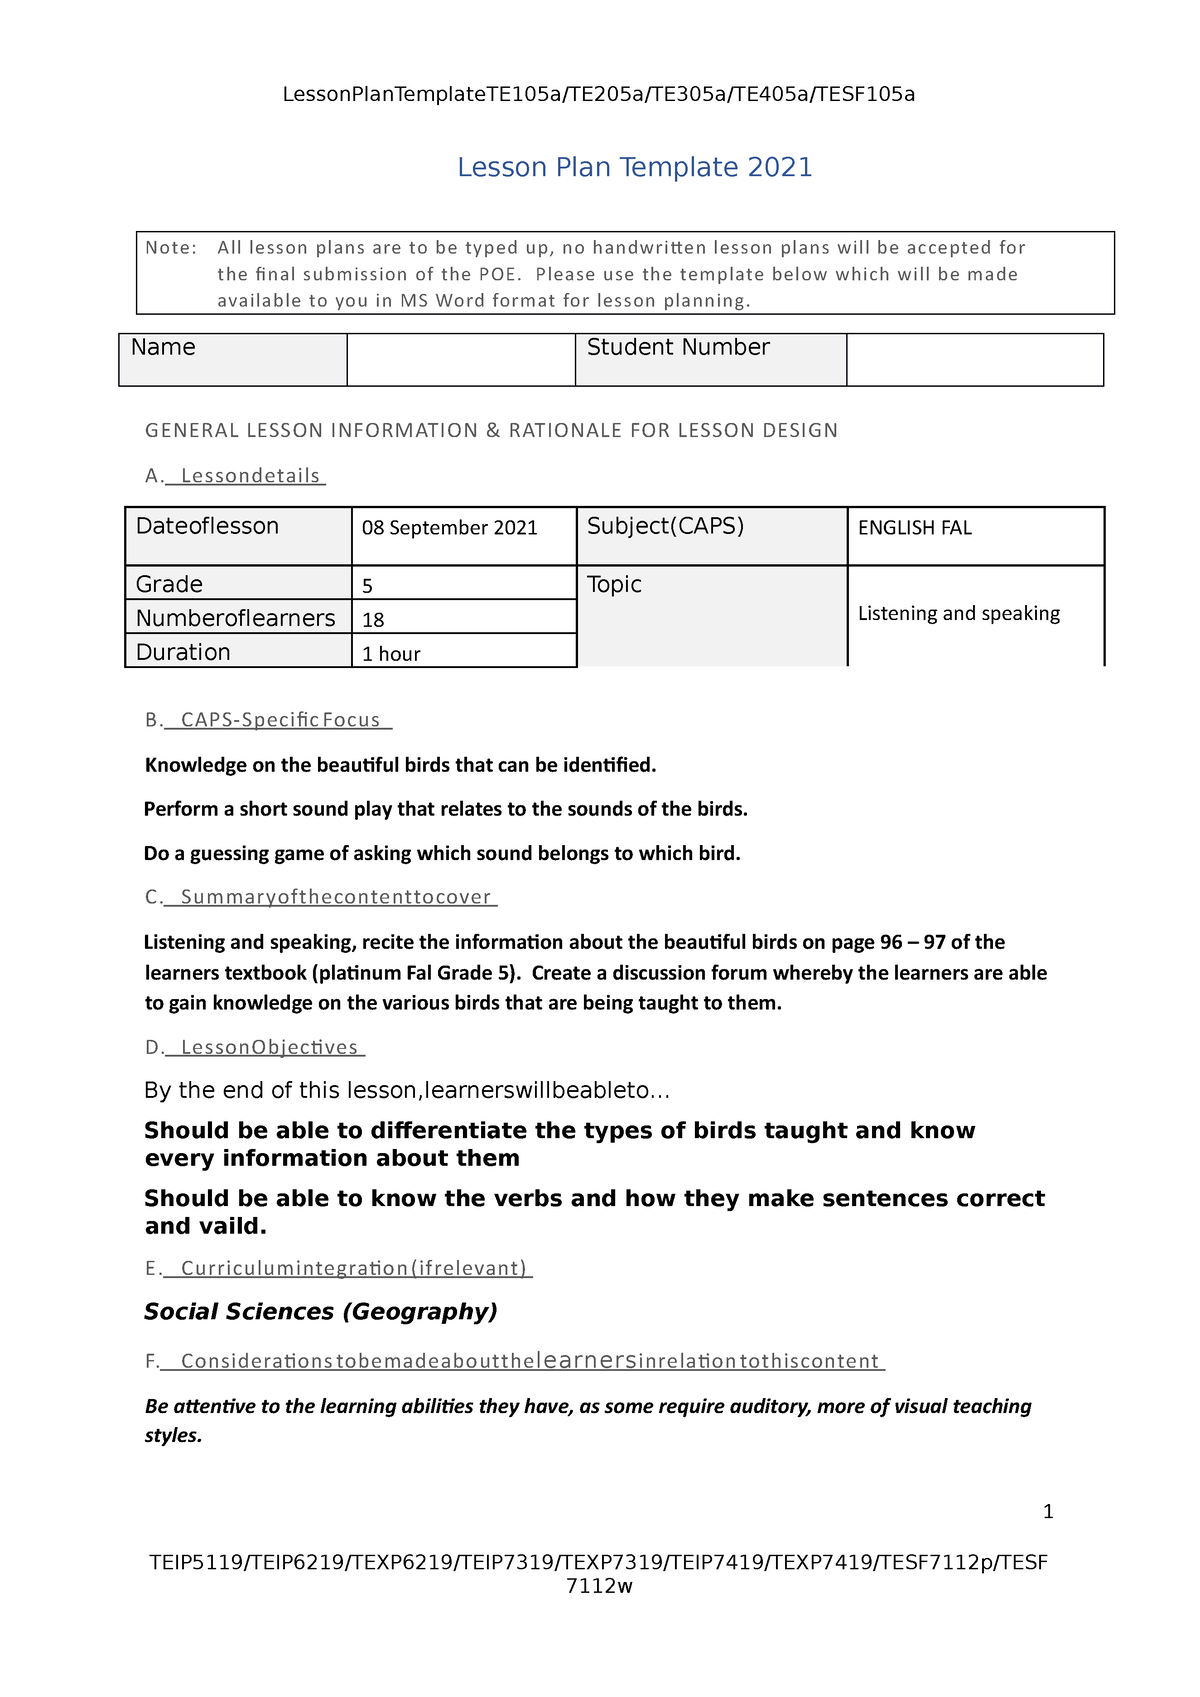 English FAL lesson plan Lesson Plan Template 2021 Note: All lesson